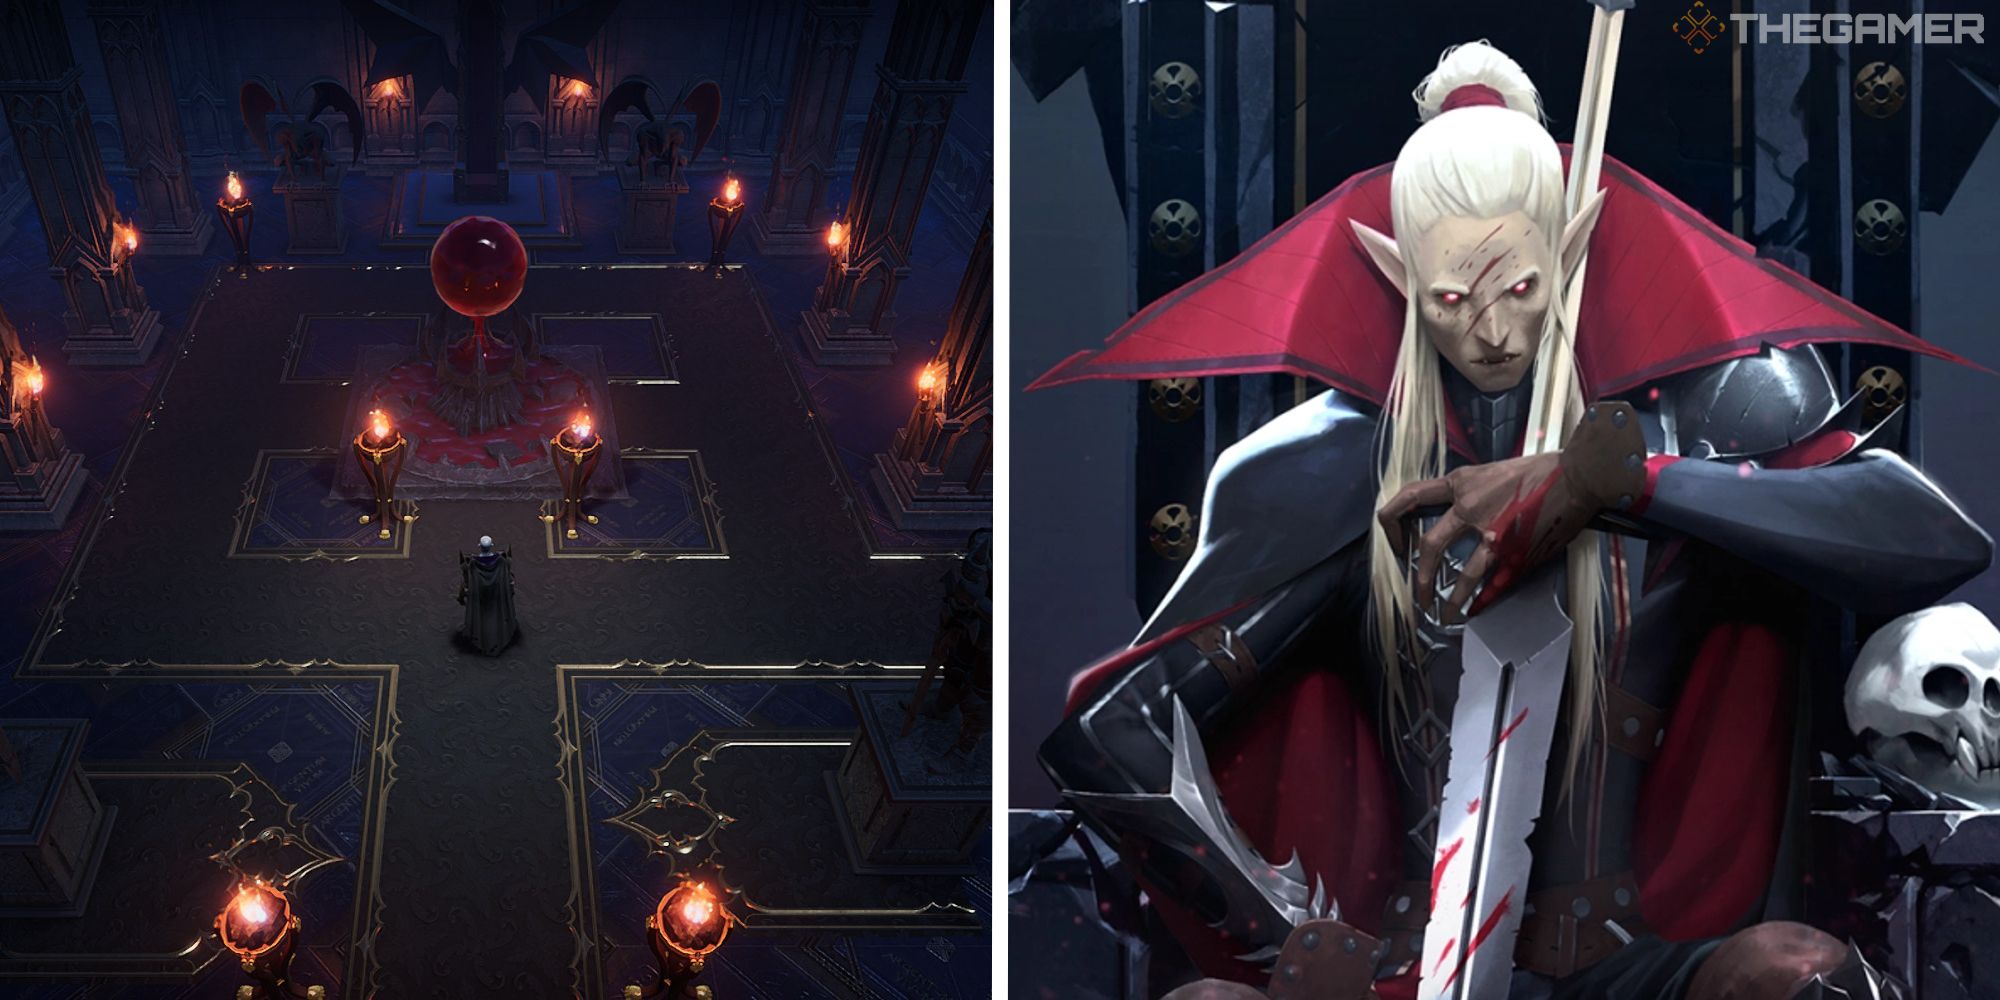 image of player at castle heart next to image of promotional art for v rising